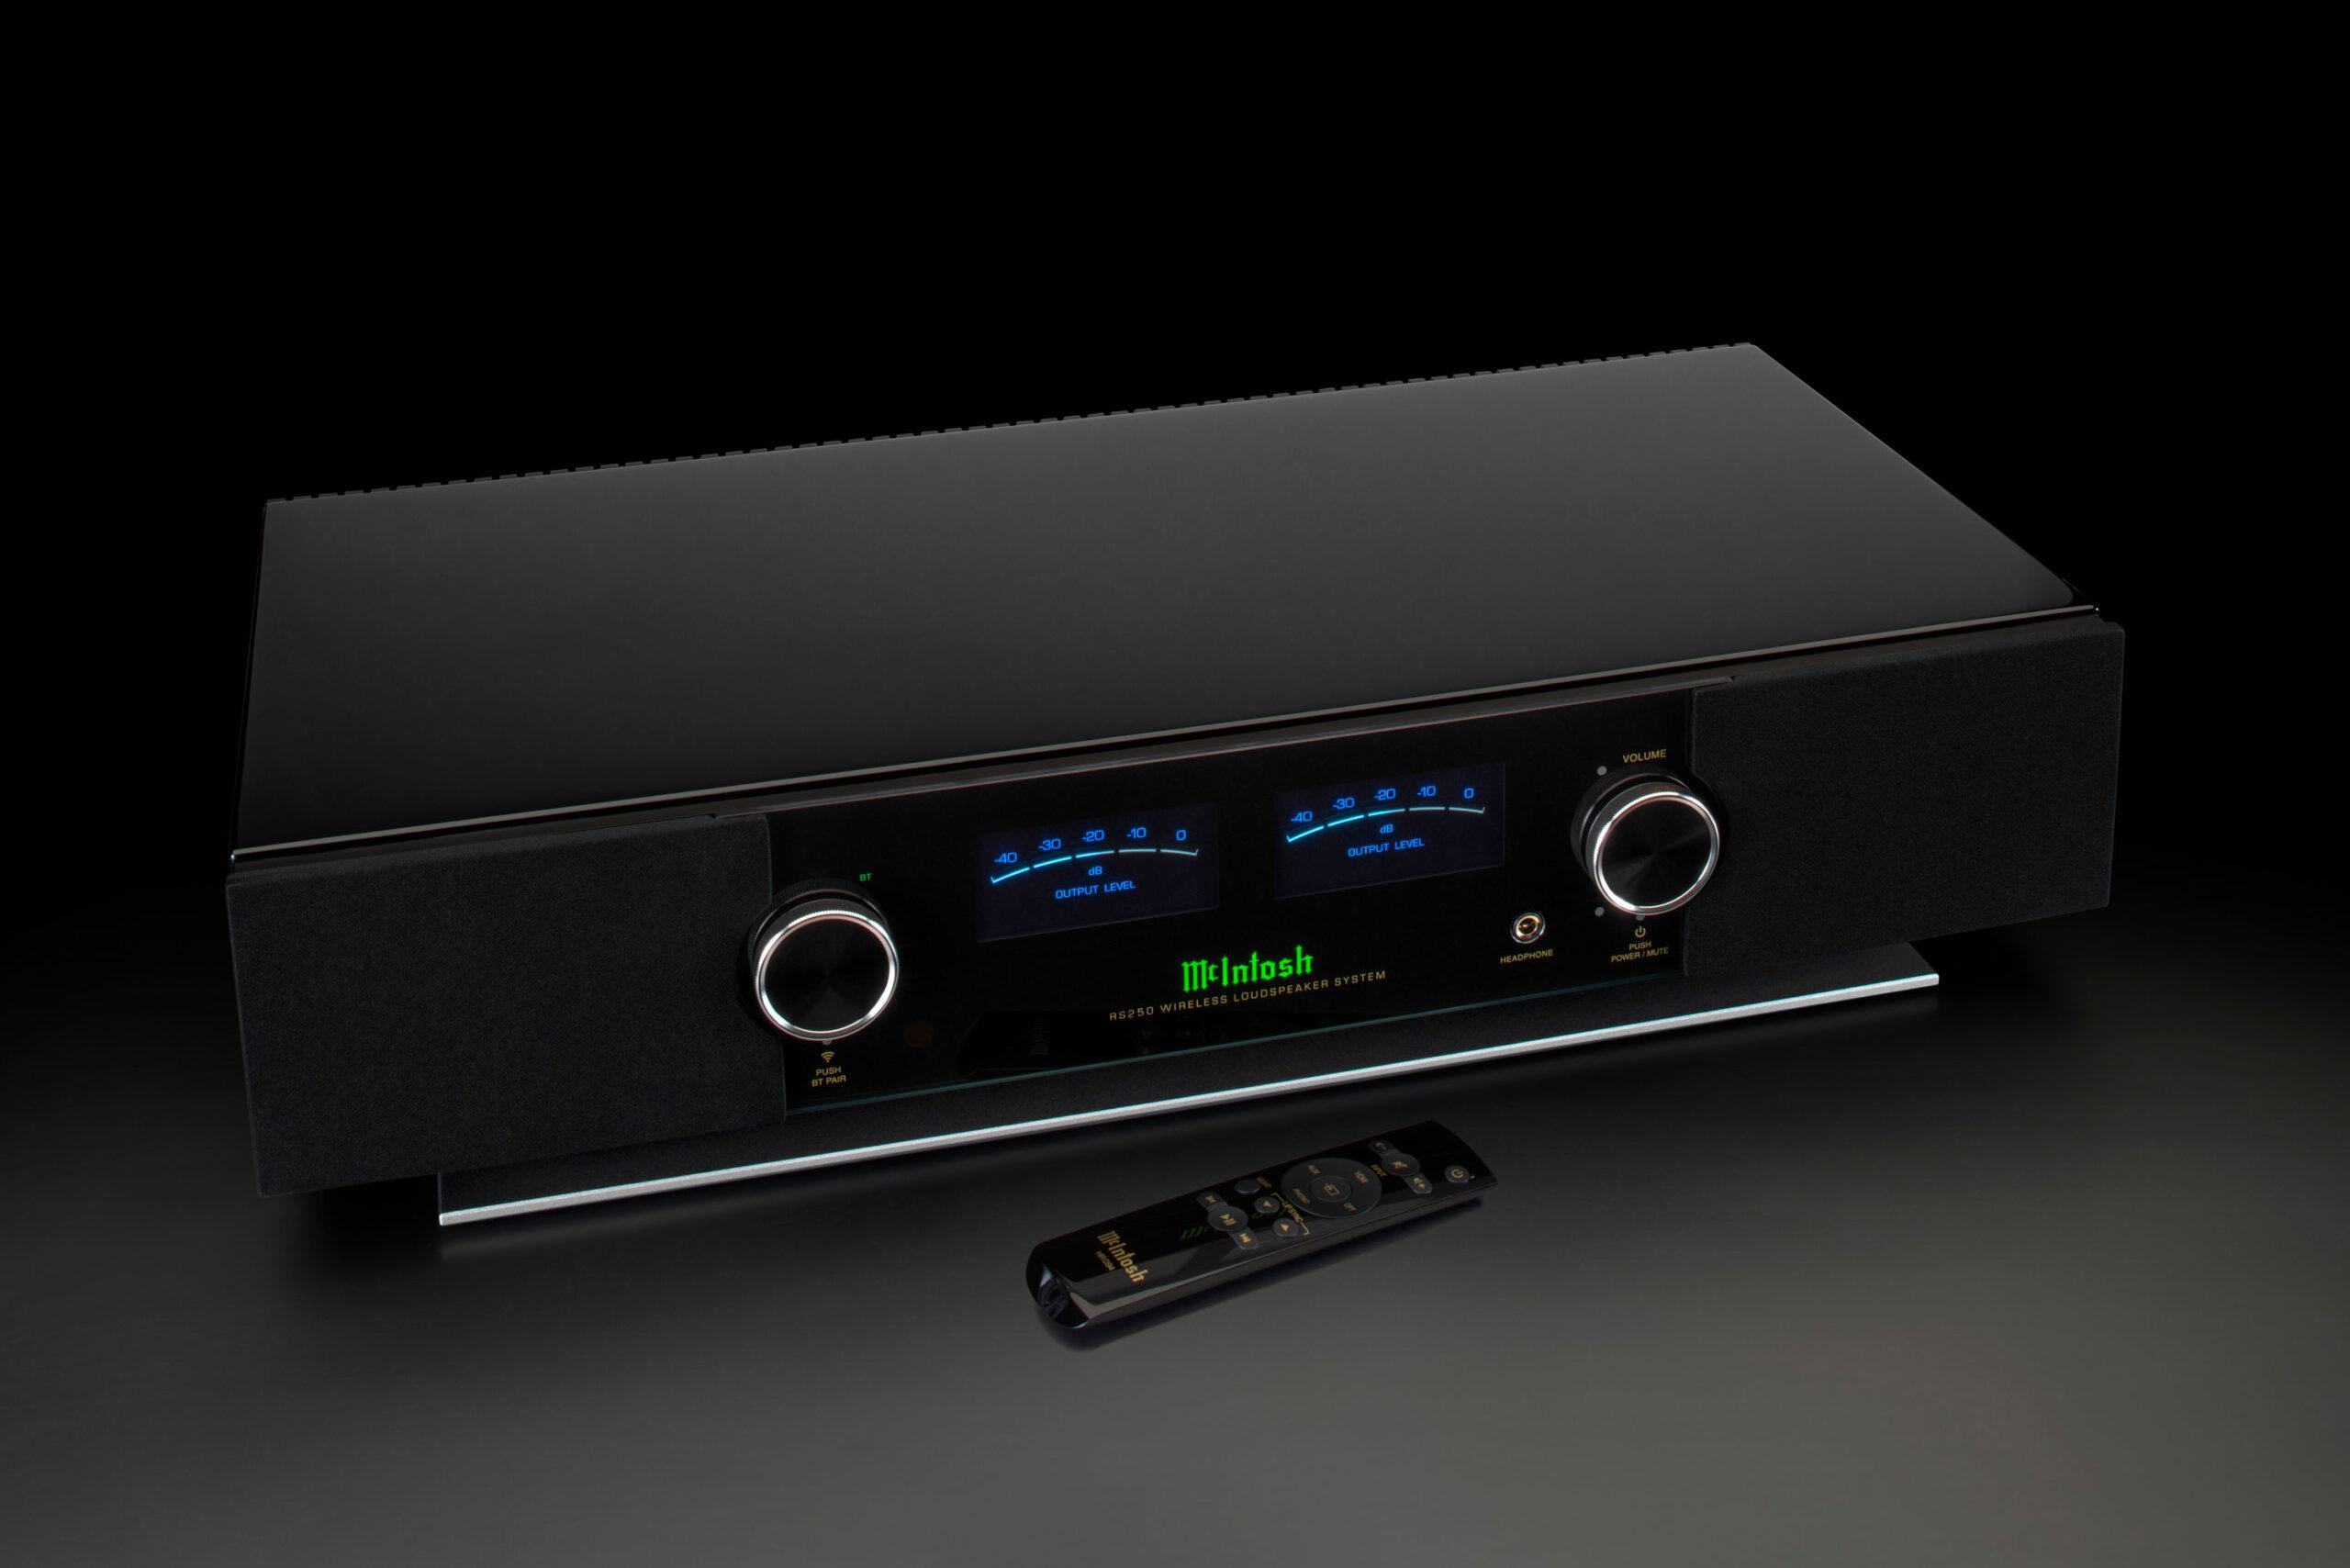 Two wireless speakers, the RS150 and RS250, offer streaming convenience with unmistakable McIntosh style, quality & performance. McIntosh 620bc520 rs250 angle remote background hi res scaled